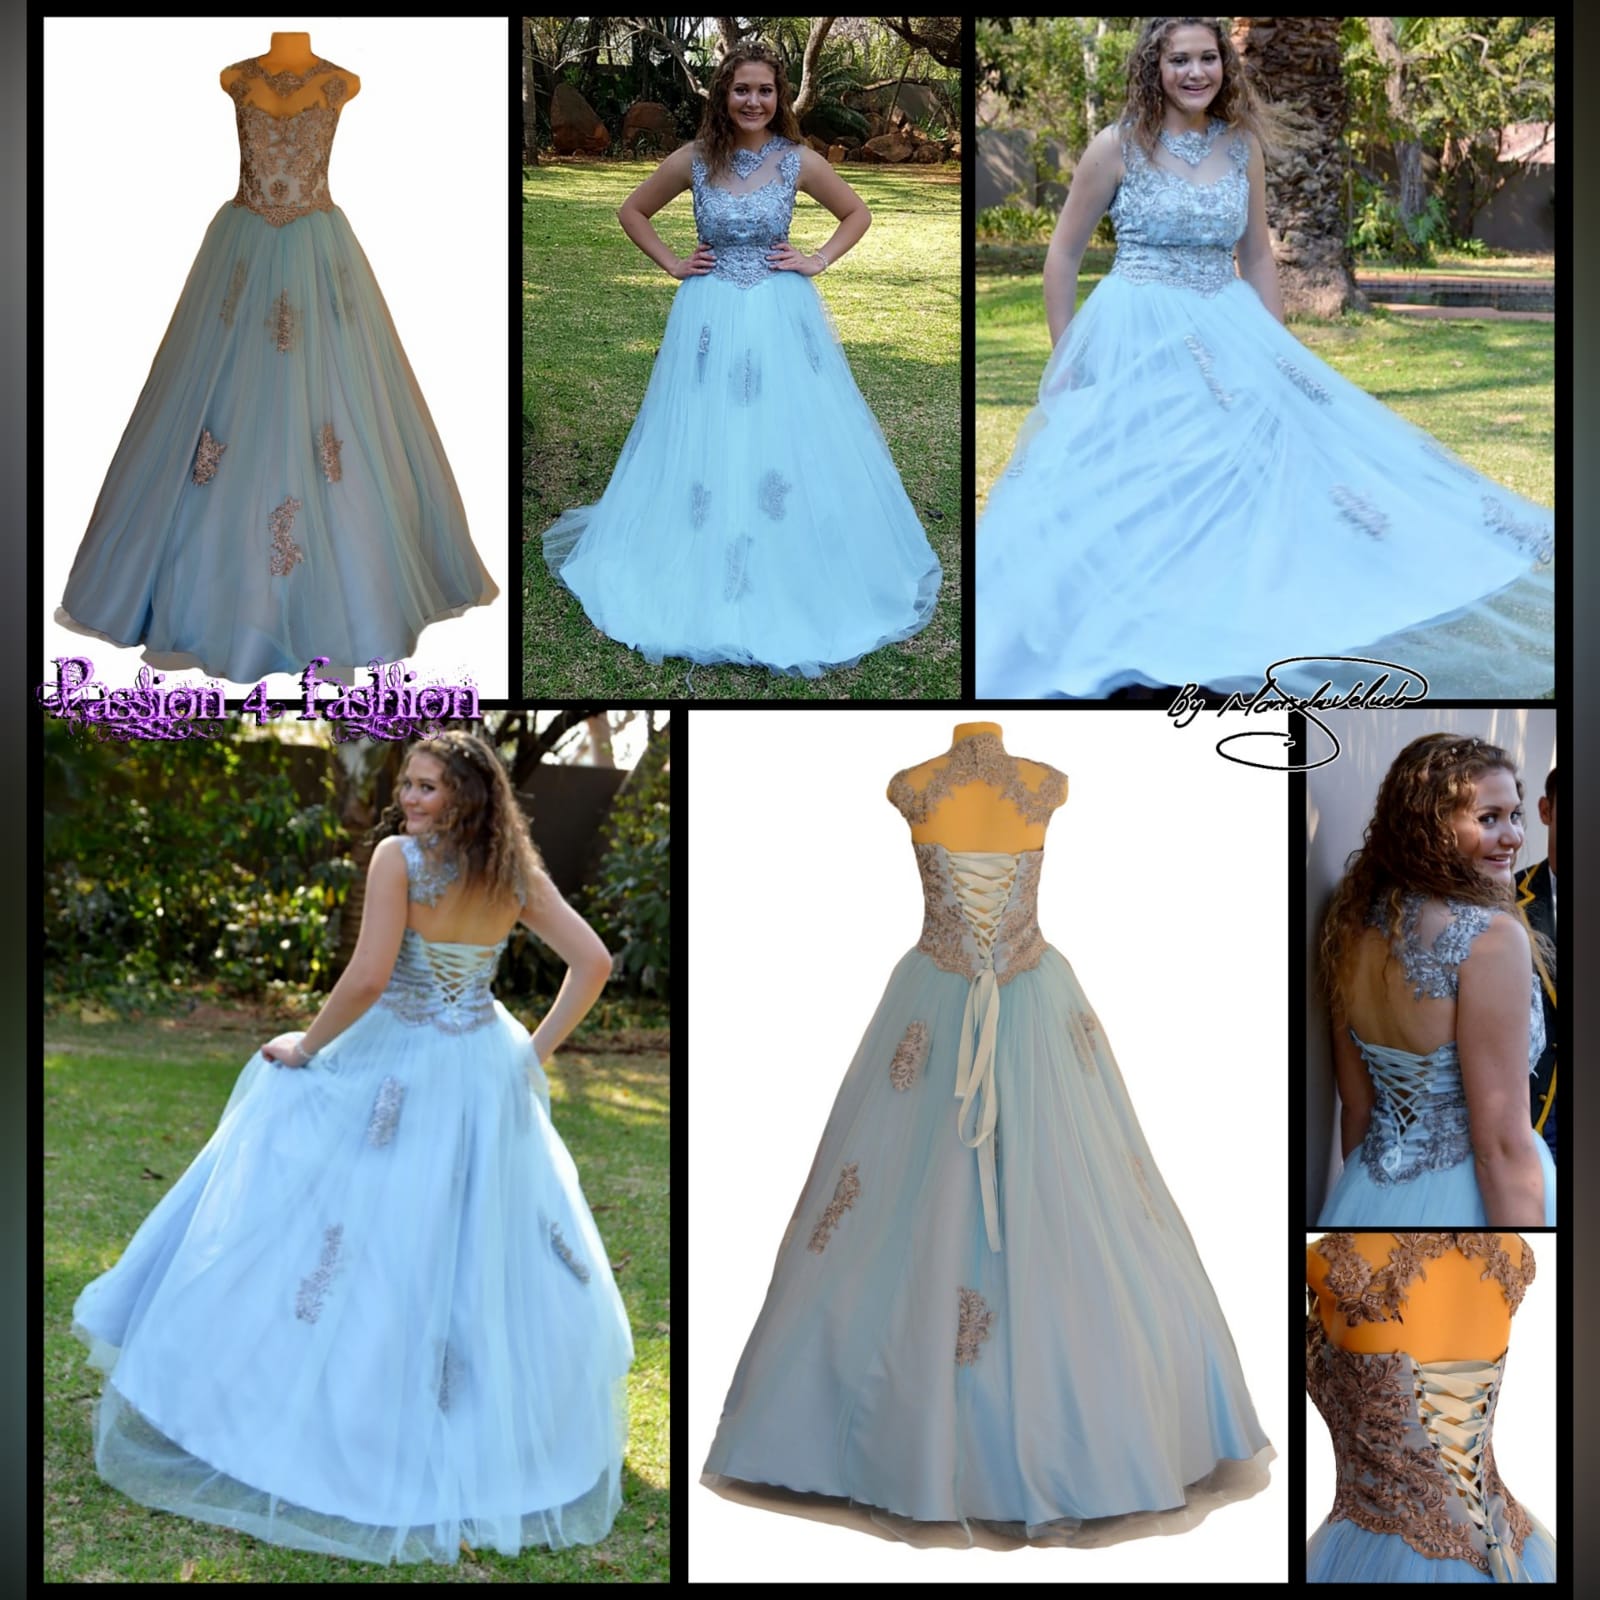 Powder blue and silver prom ball gown dress 7 powder blue and silver prom ball gown dress. With a lace-up back. Bodice detailed with silver lace and beads. Illusion neckline and shoulders. Bottom of the dress with tulle detailed with lace appliques.